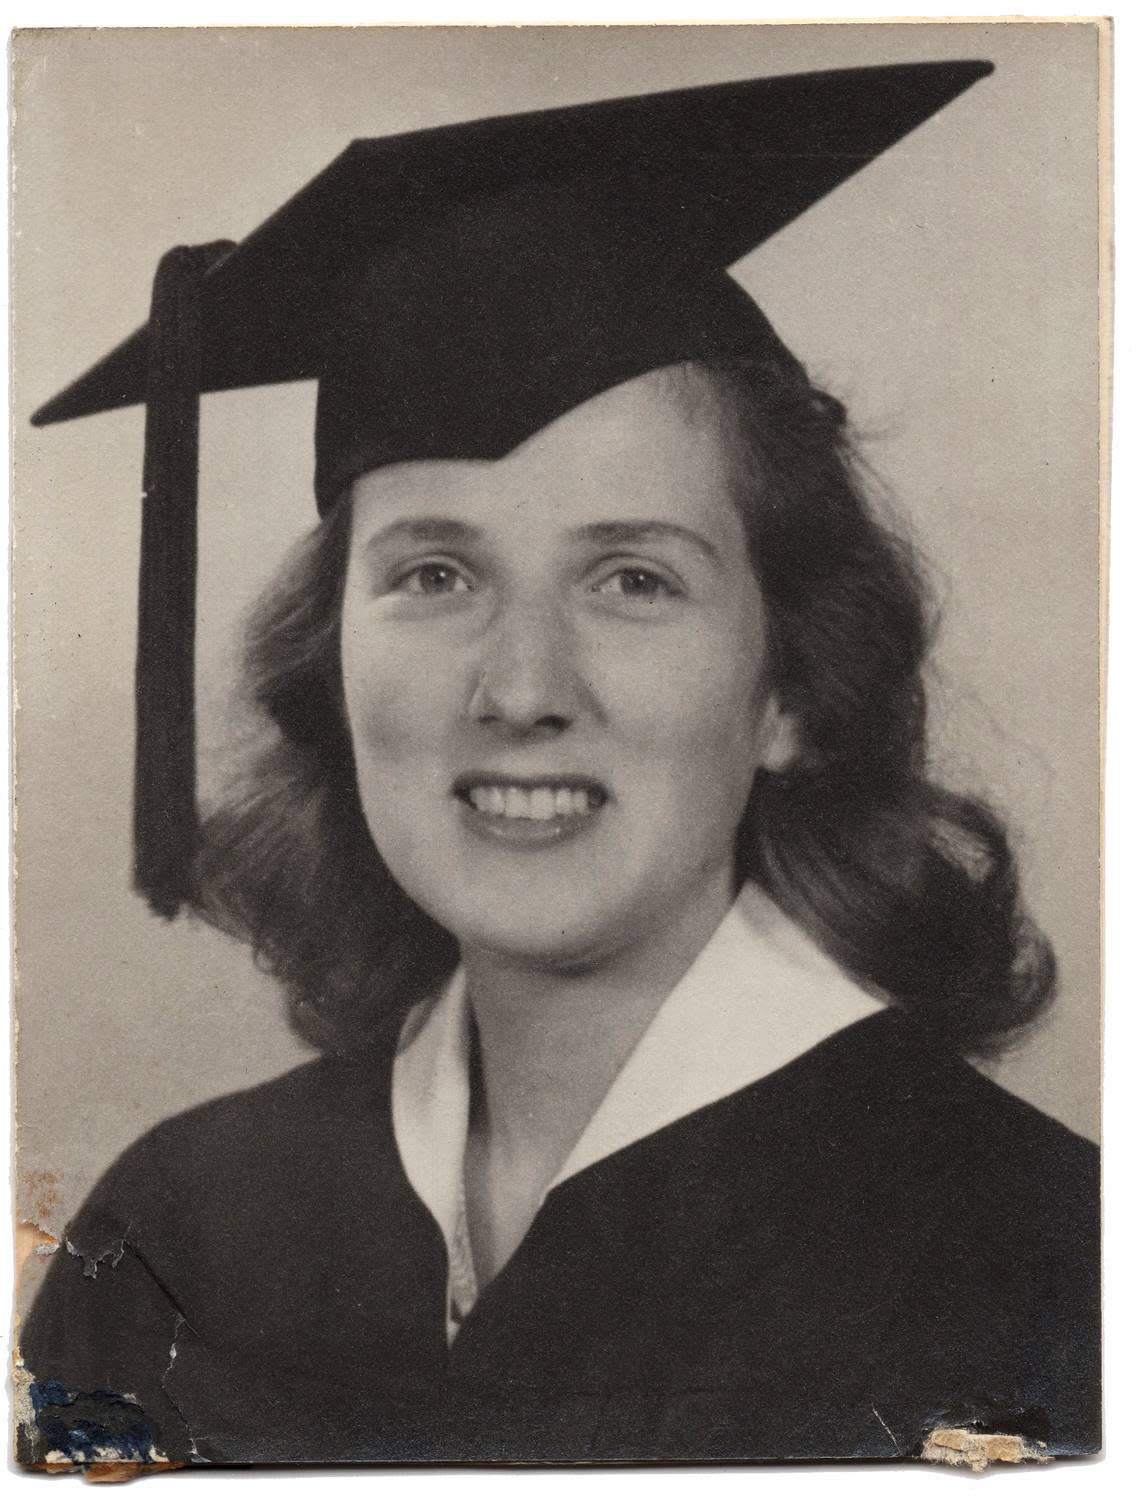 A school graduation photo from the 1940s of Ruth Staples, who later became Ruth Kletzing. This photograph was sold at Schiff Estate Services on a Del Paso Boulevard in Sacramento in December.